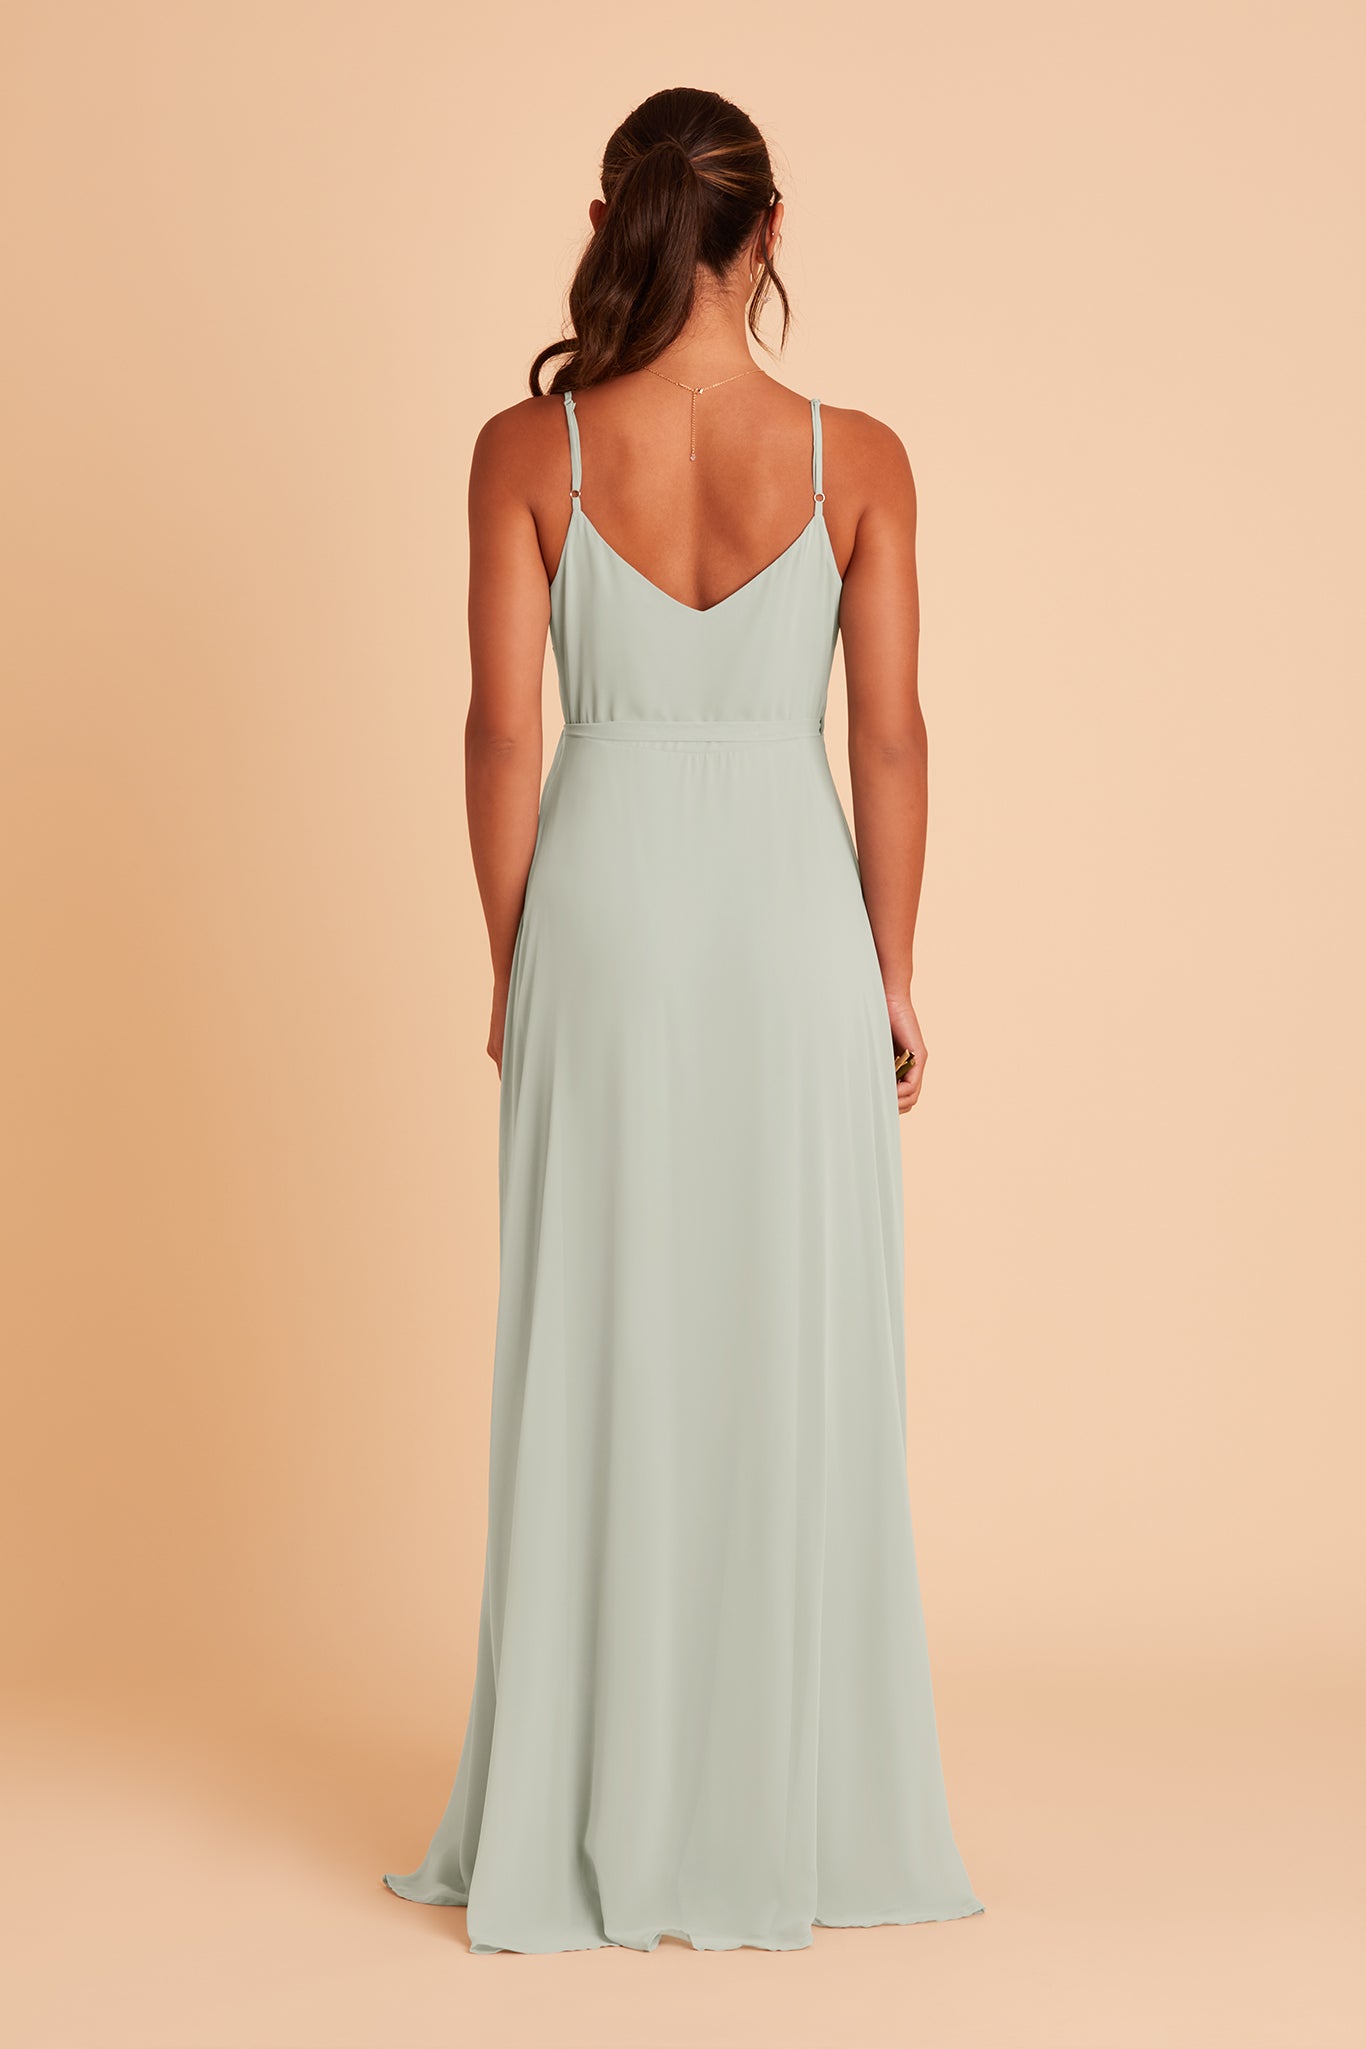 Back view of the Cindy Bridesmaid Dress in sage chiffon features a slip-style back with a gracefully flowing full-length skirt.